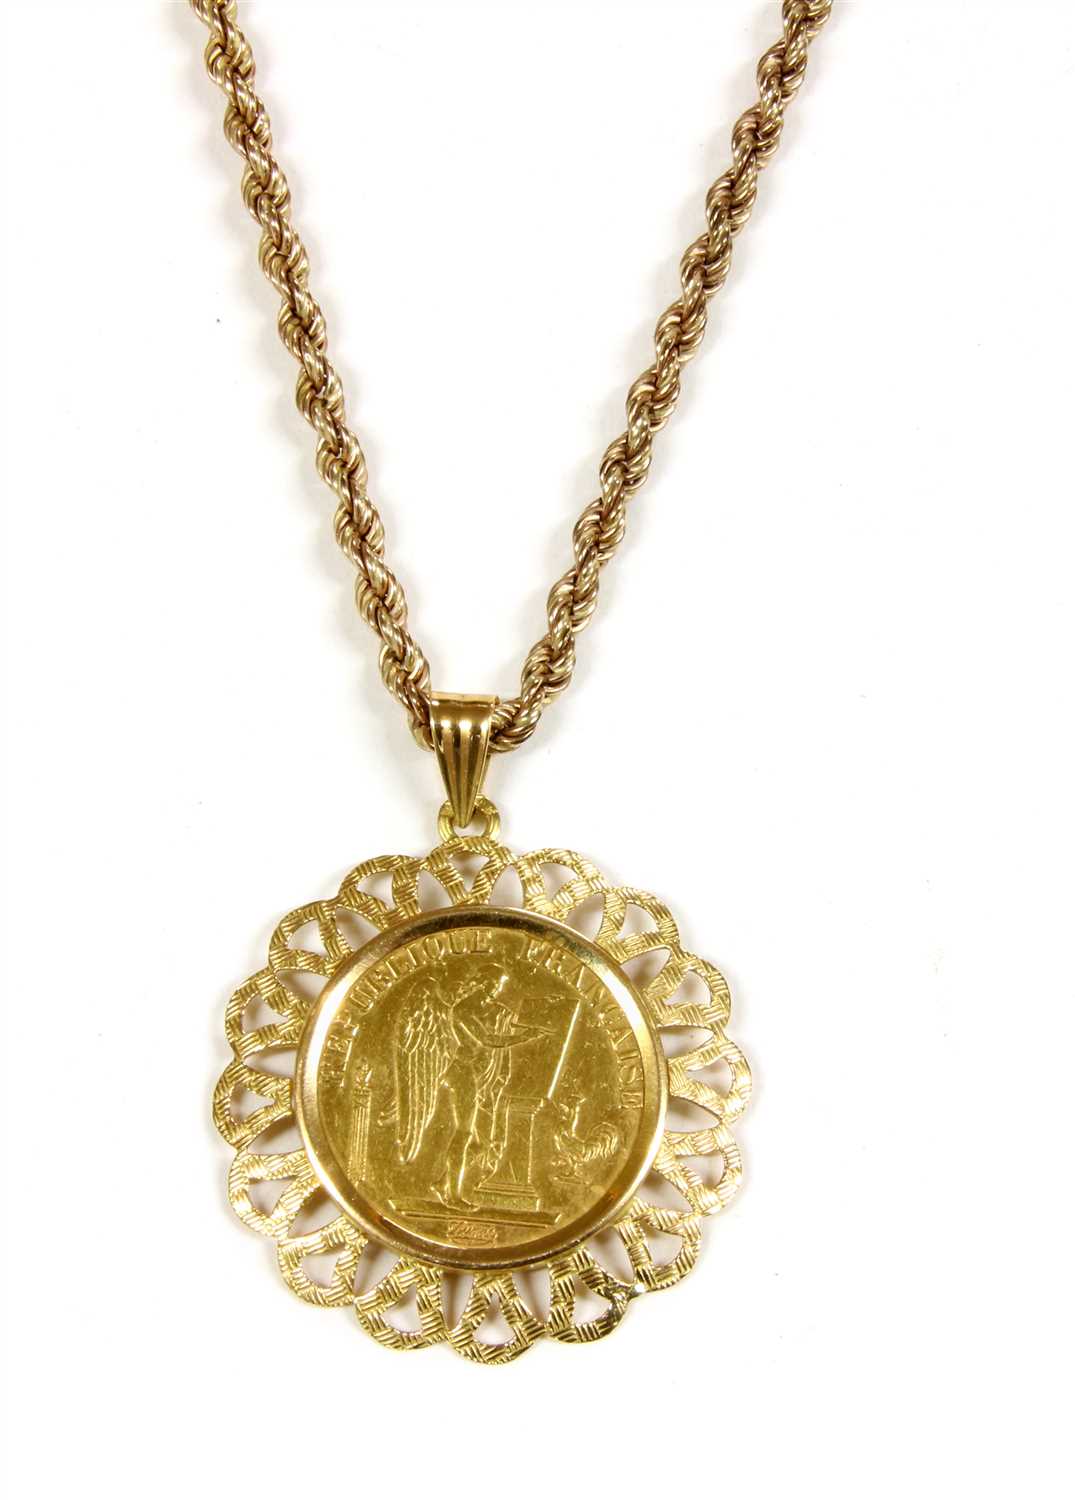 Lot 28 - An 1896 20 Francs coin necklace